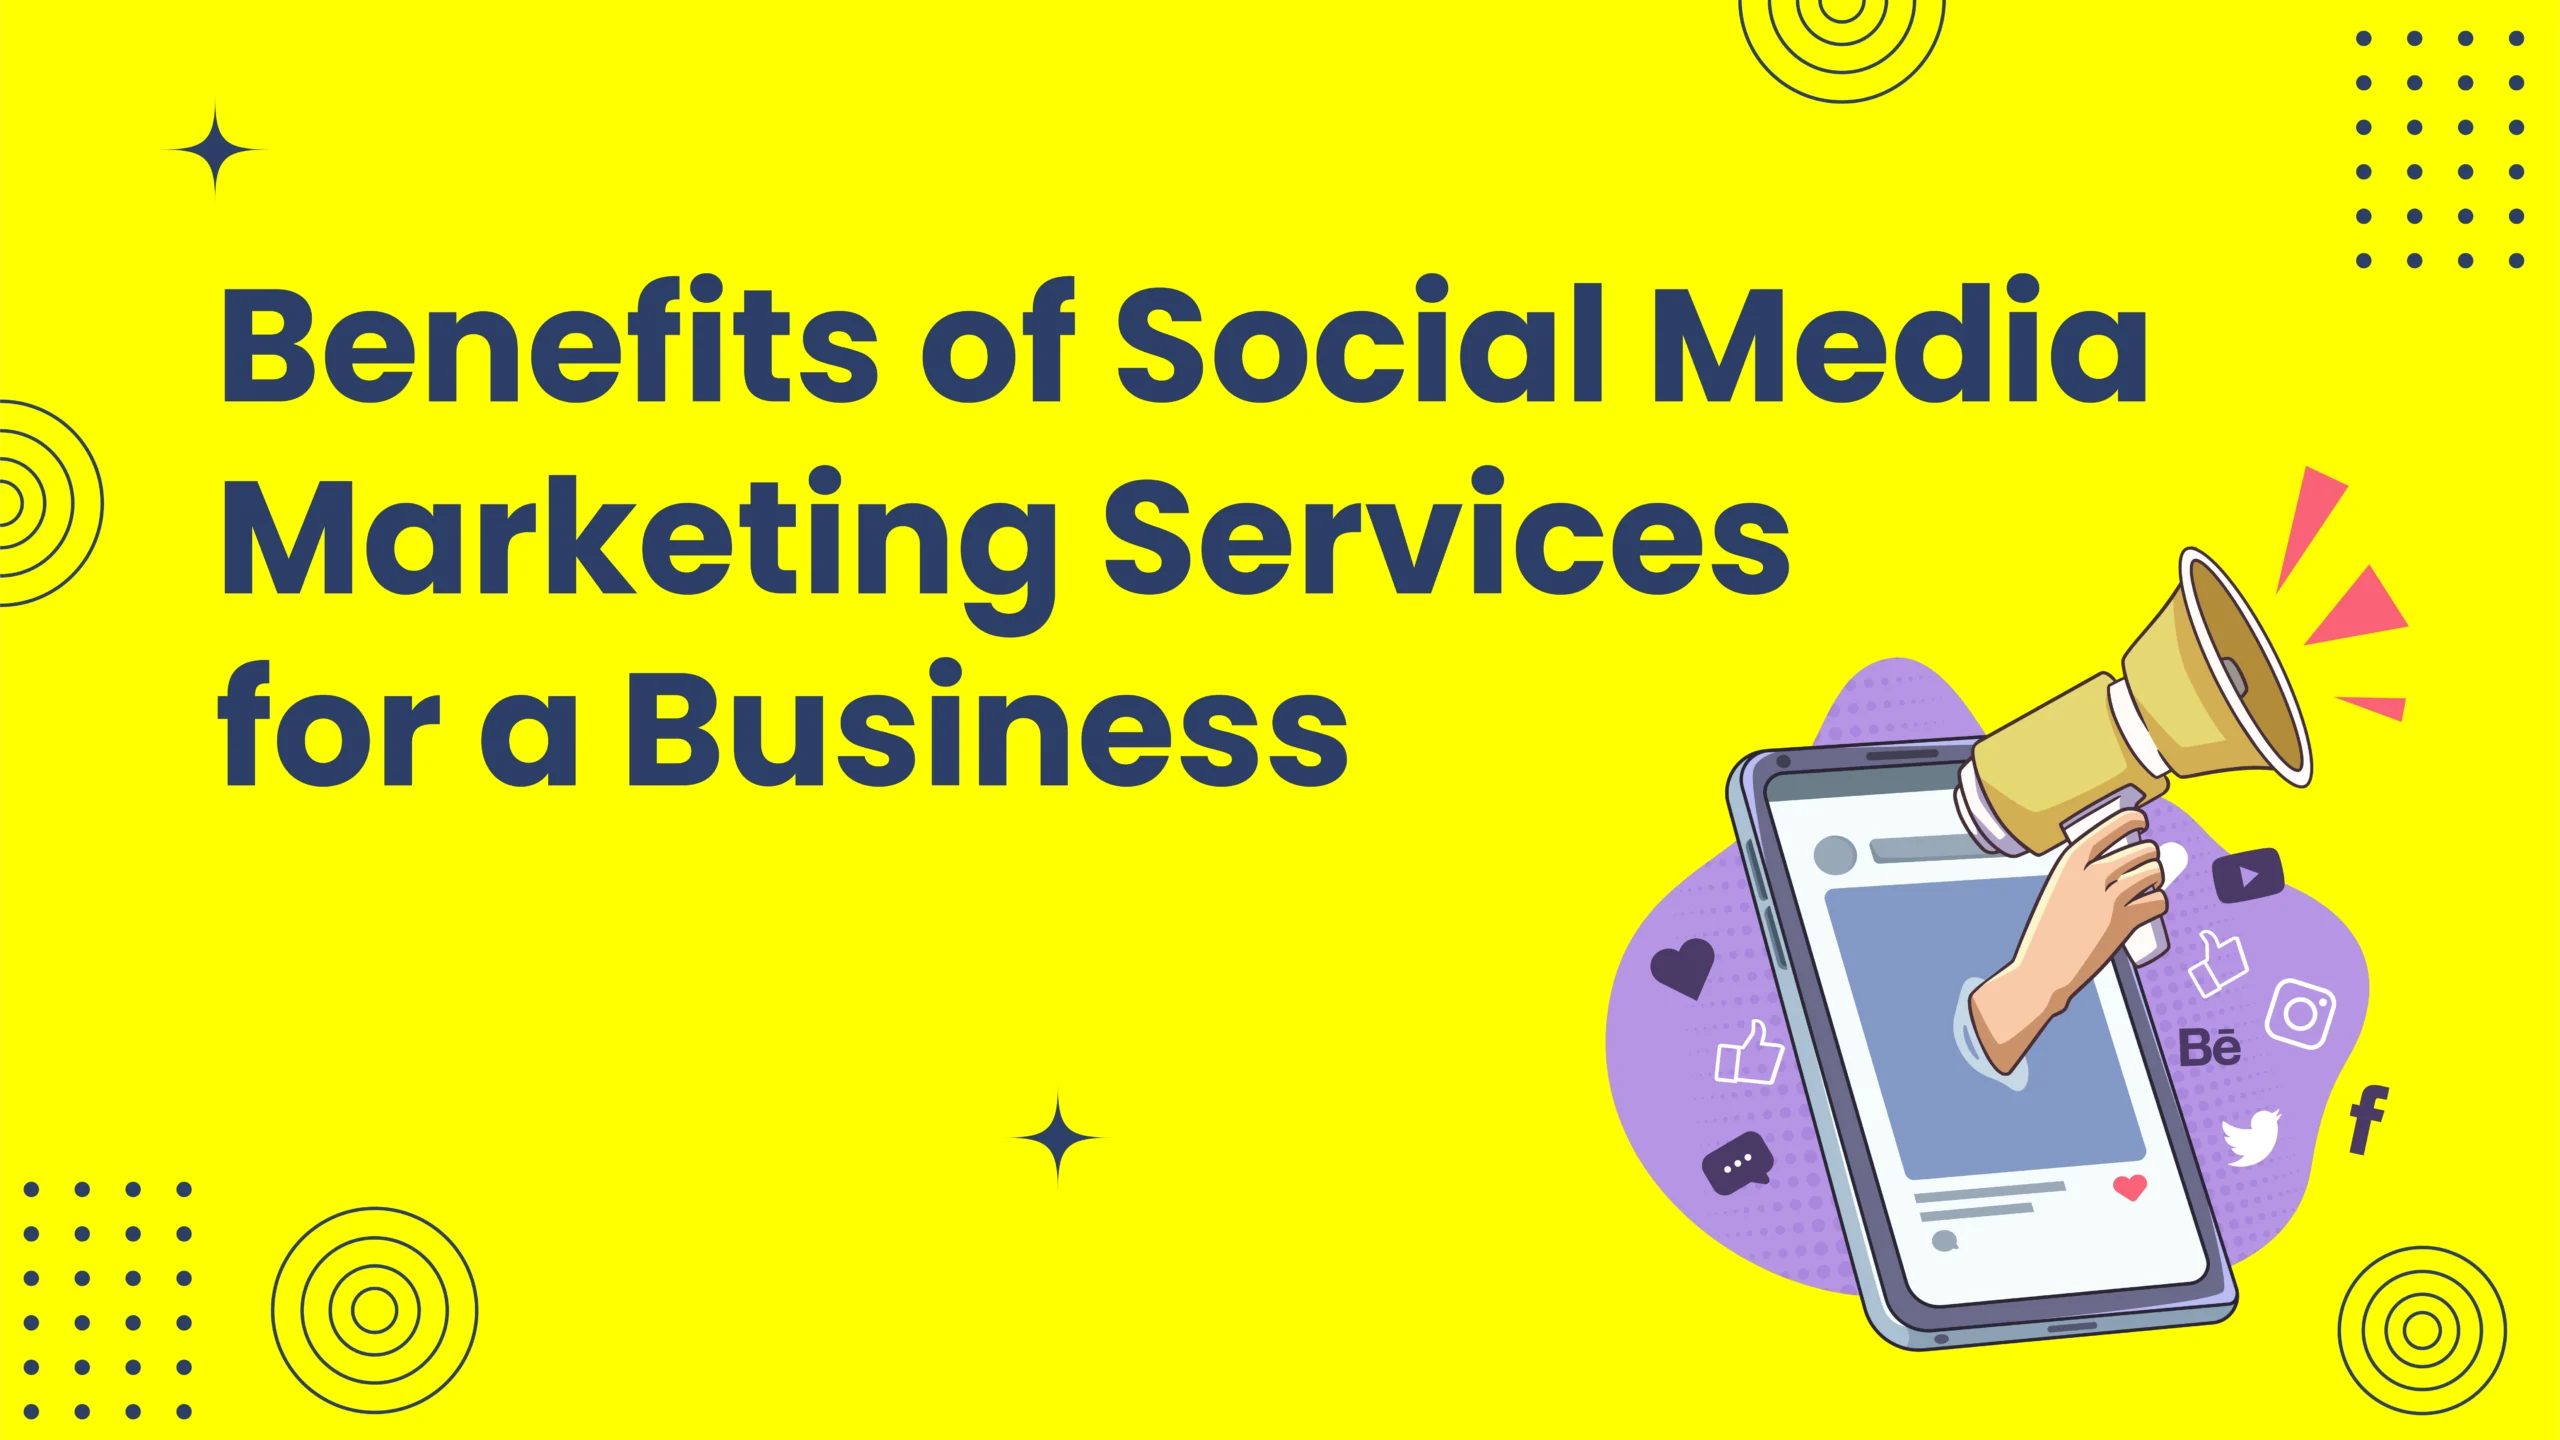 Top Benefits of Social Media Marketing Services for Business with TheAdCzar